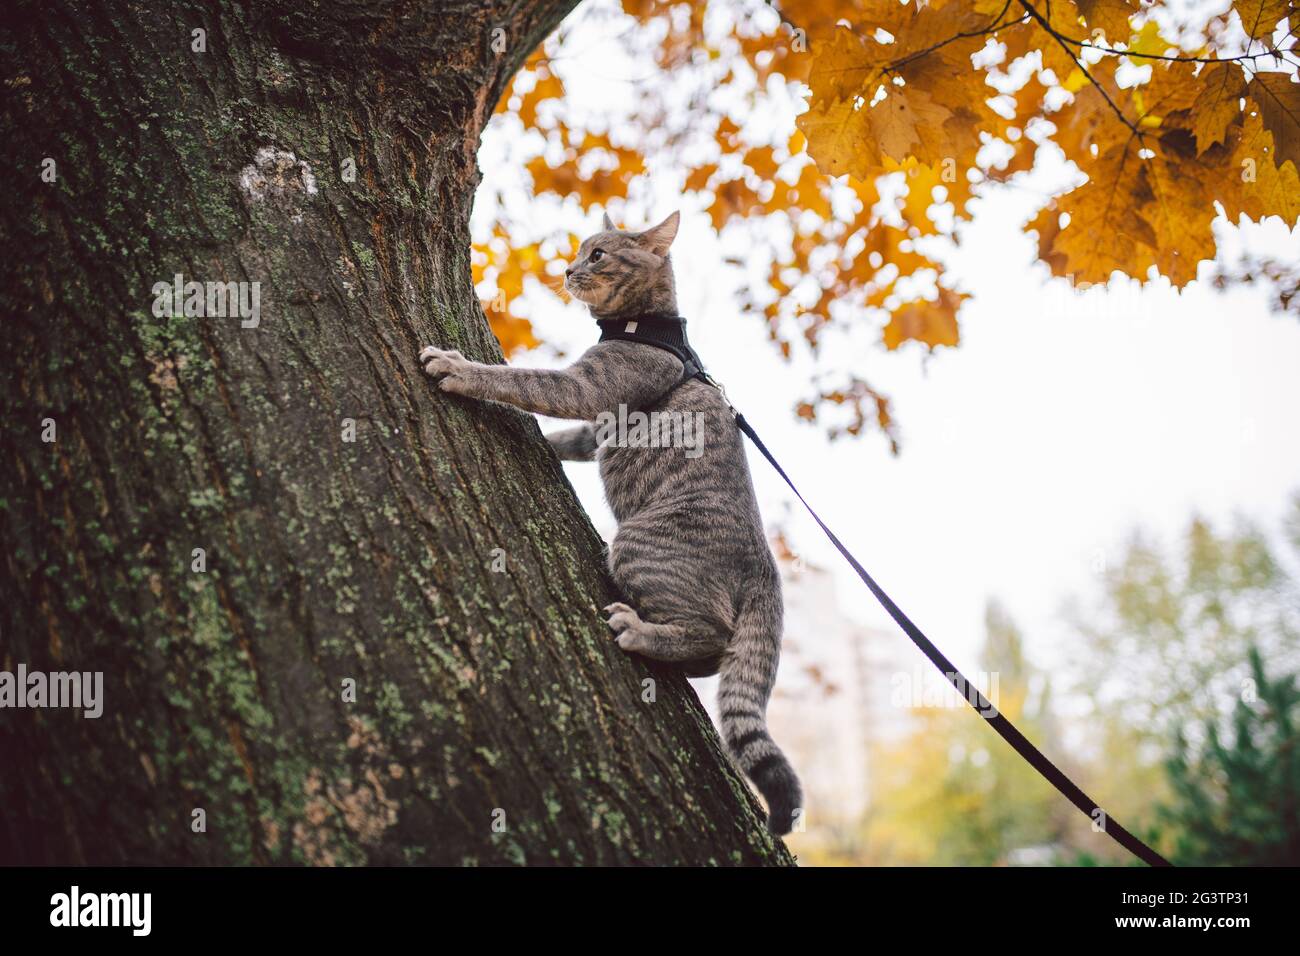 Domestic young kitten male gray good shape well-groomed, dressed safe cat leash harness, sitting on a tree attentively surprised Stock Photo